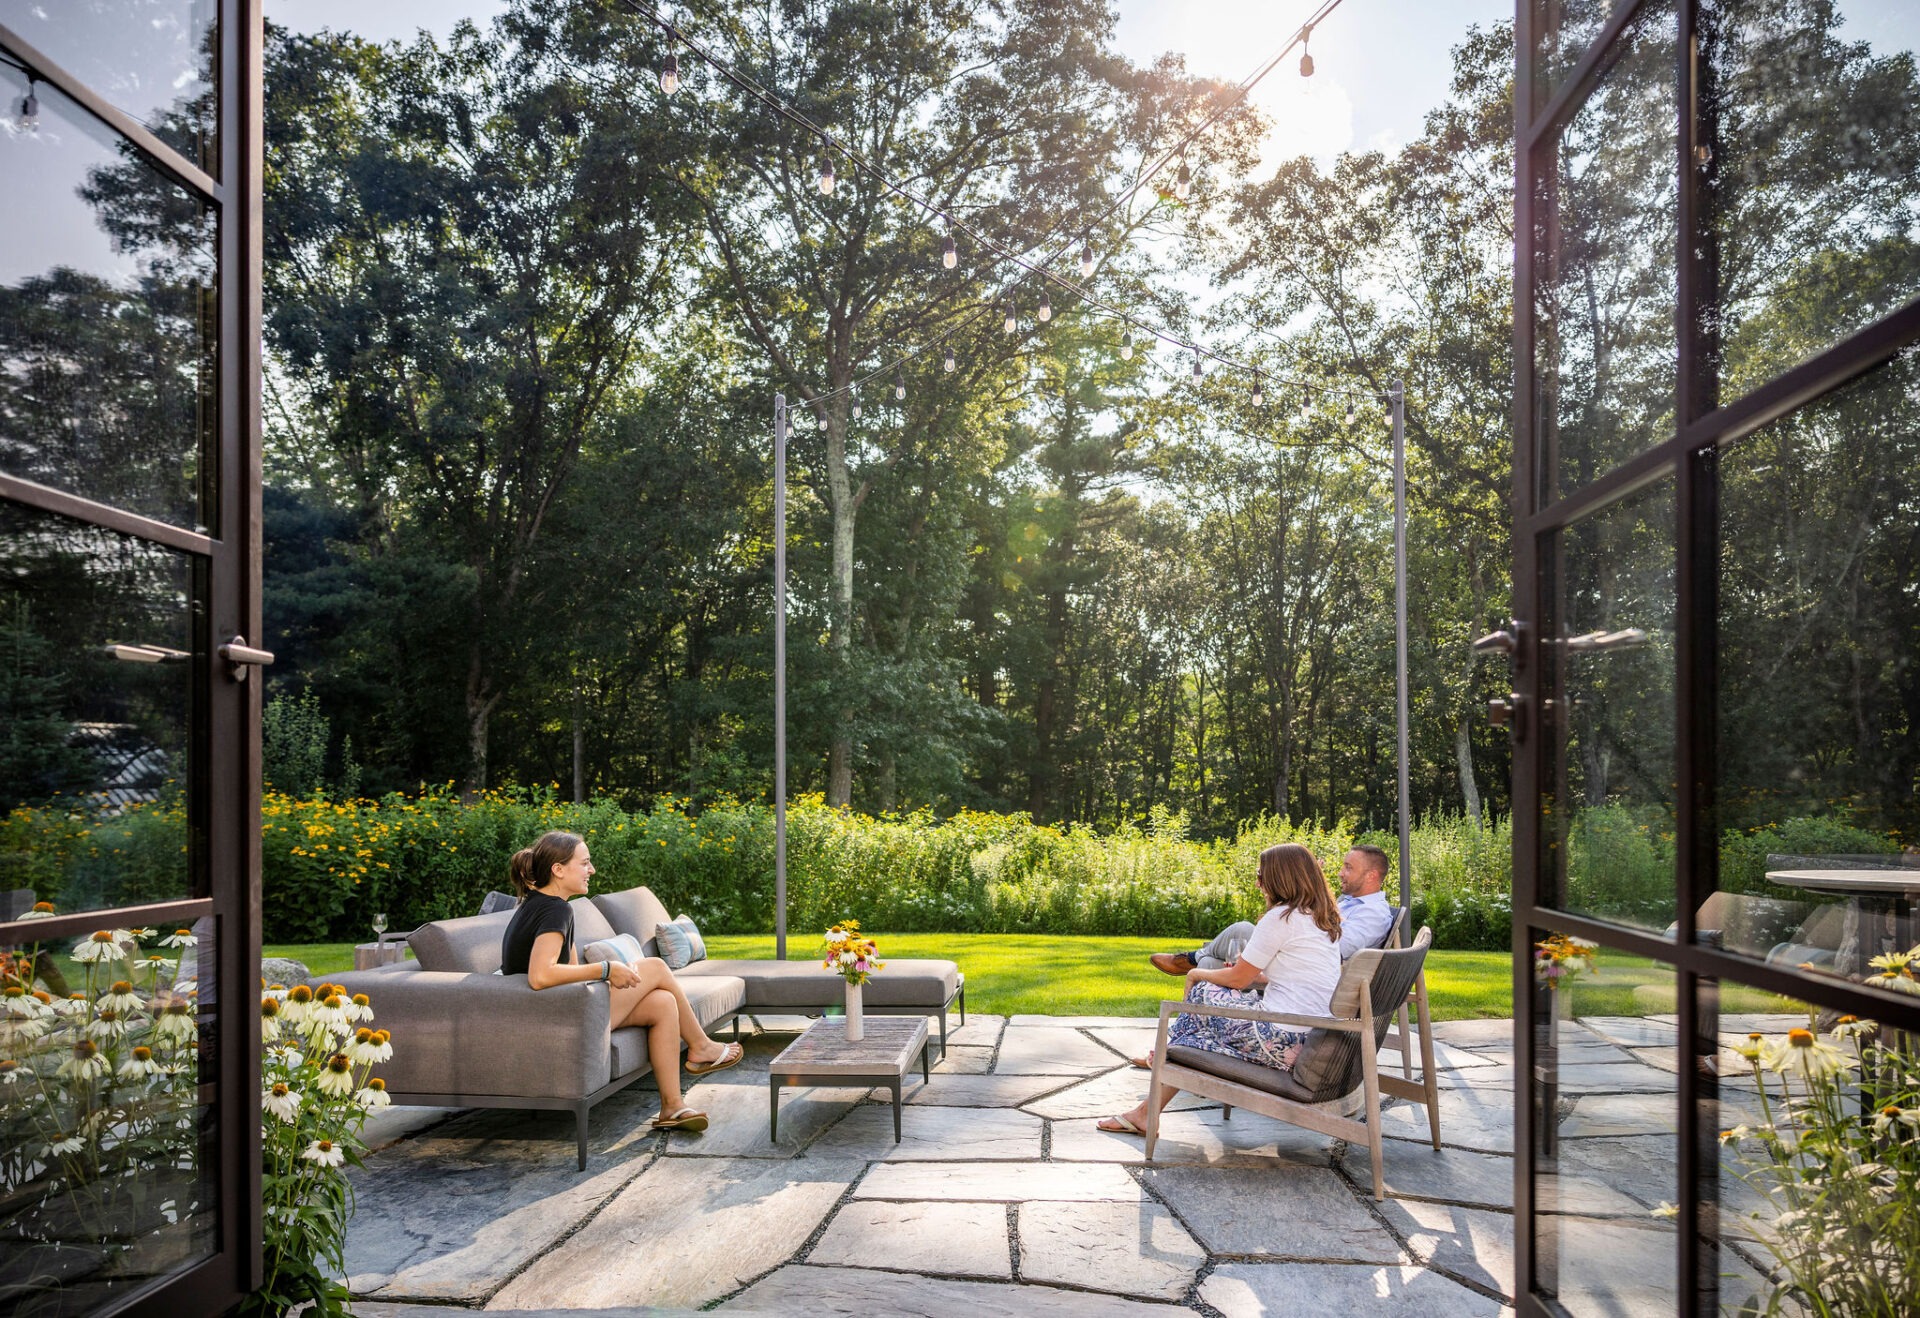 Three people relax on patio furniture in a lush garden with trees, flowers, and string lights, viewed from an open glass door.